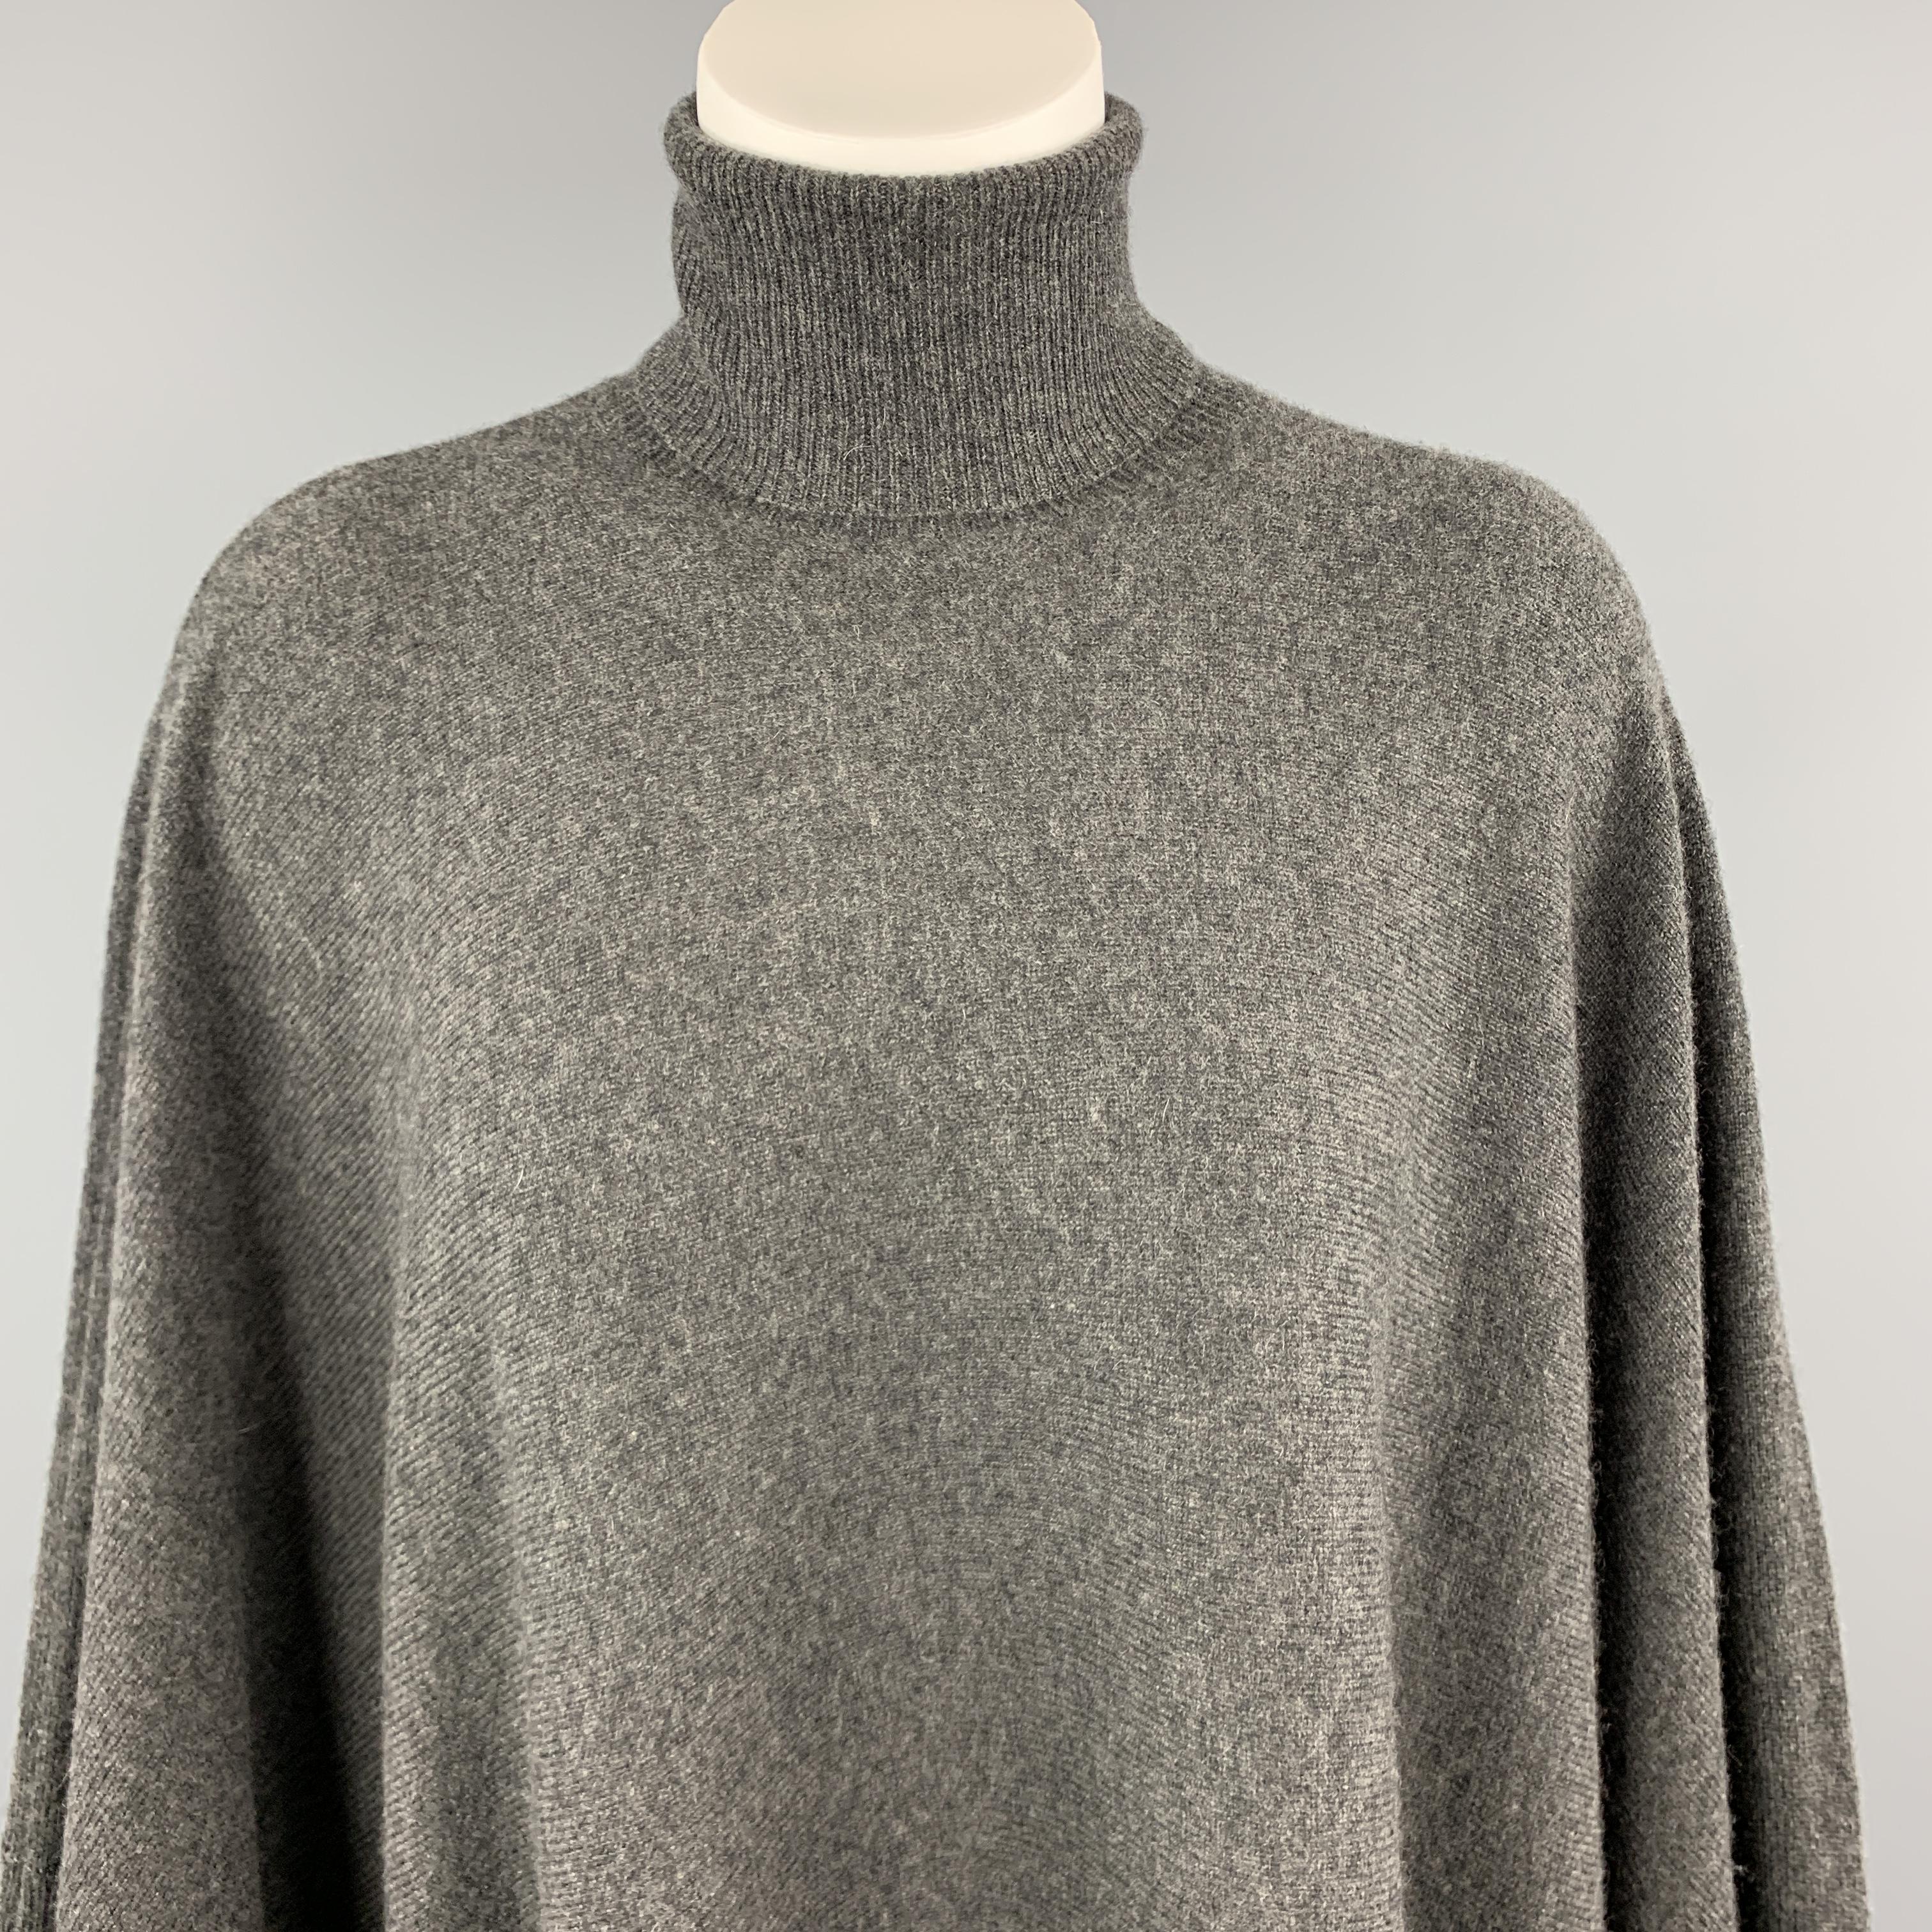 RALPH LAUREN Blue Label cape comes in charcoal gray cashmere with a turtleneck and draped body.

Excellent Pre-Owned Condition.
Marked: XSS

Width: 55 in.
Length: 30-38 in.